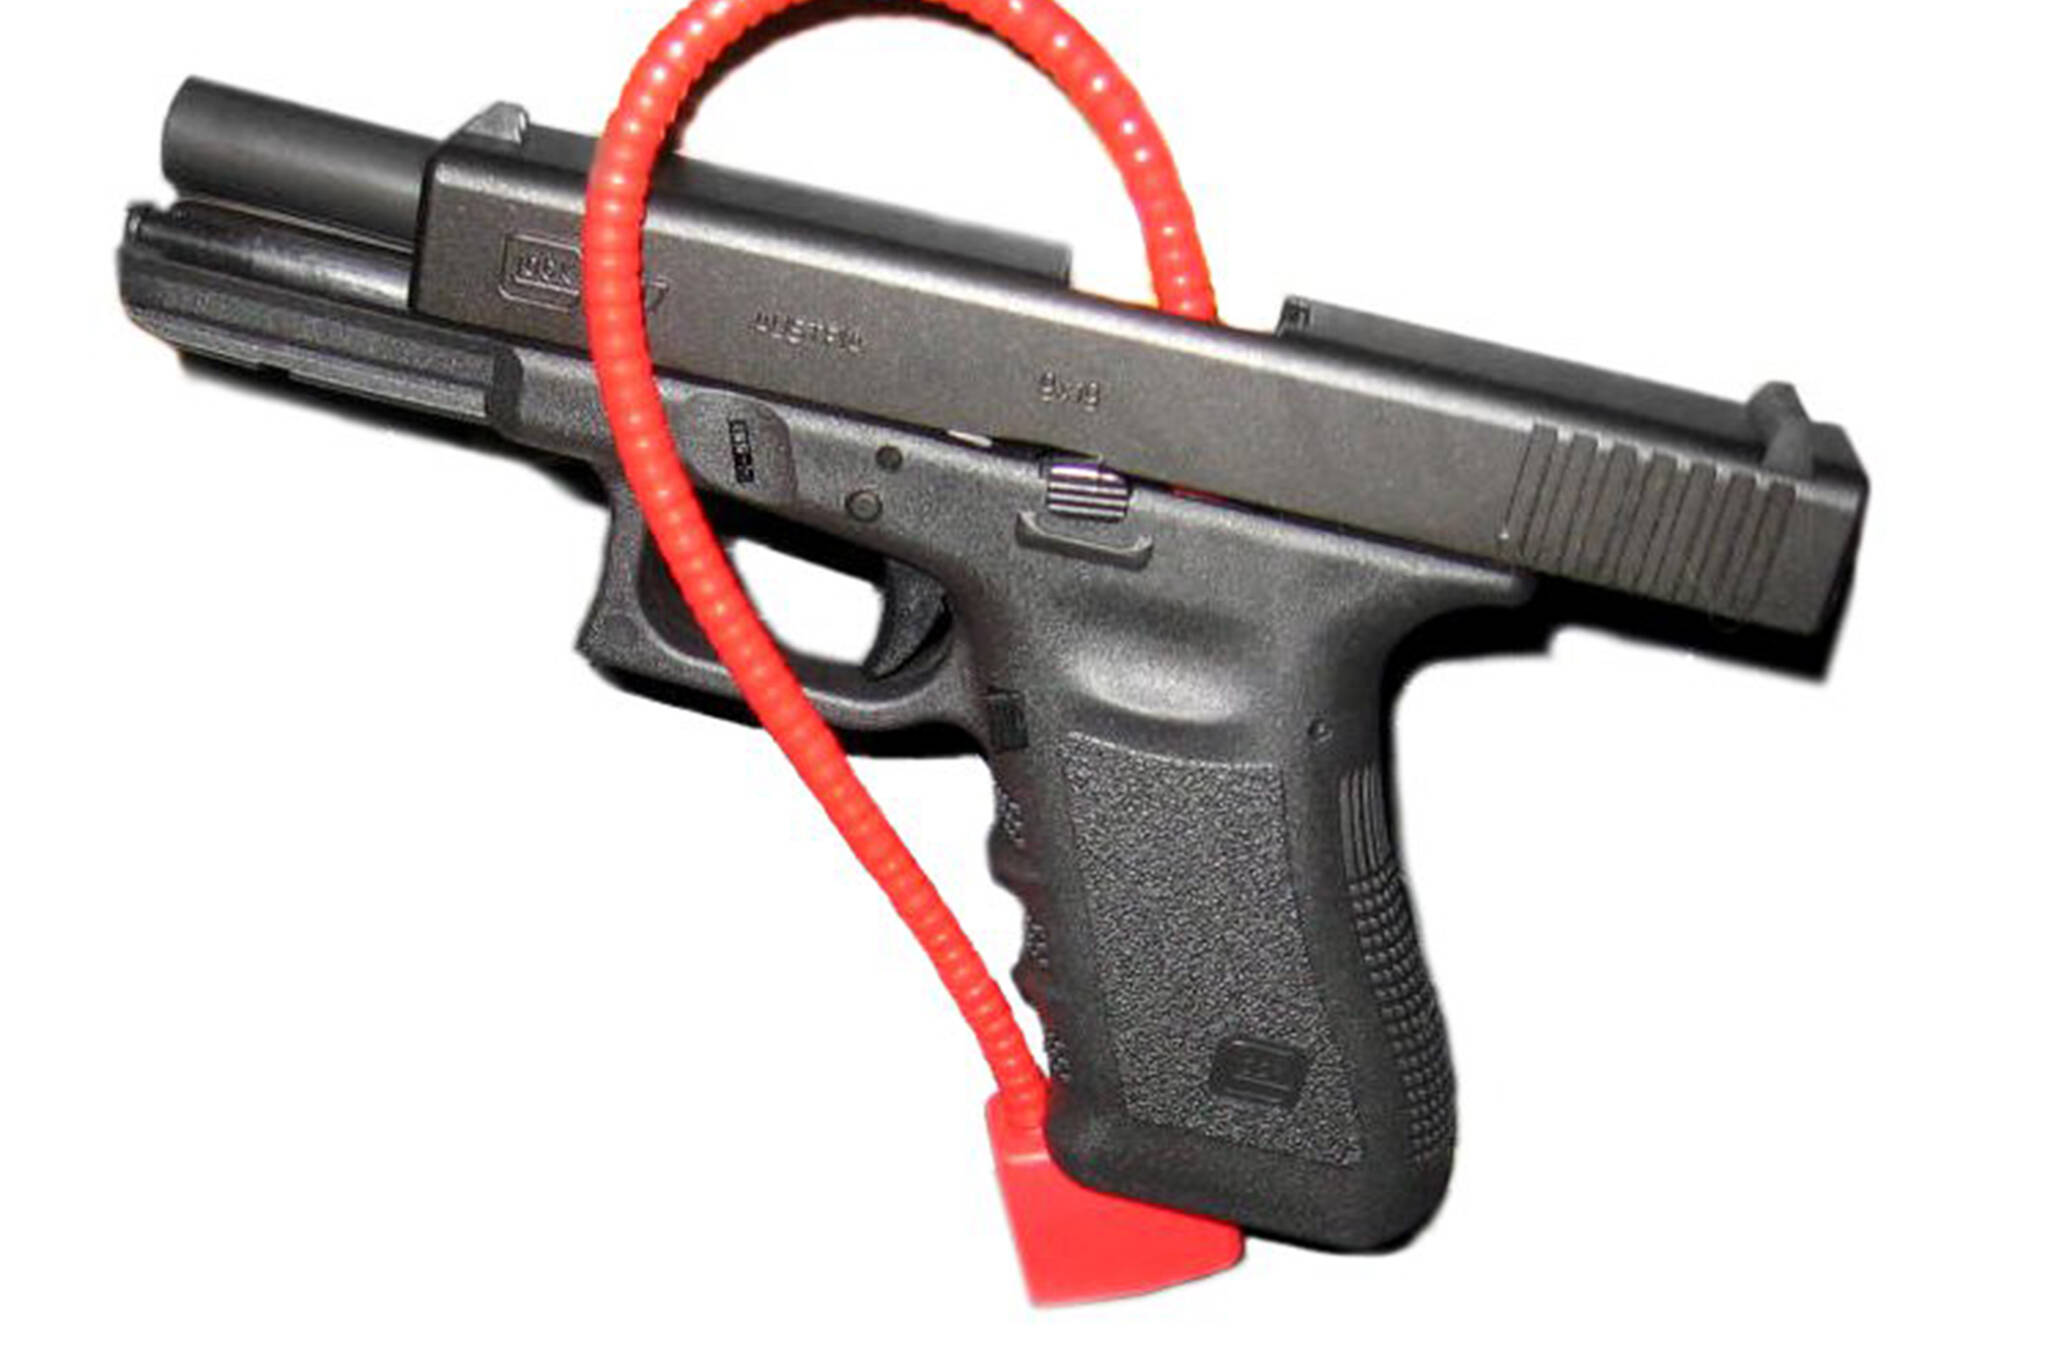 This image available under a Creative Commons license shows a handgun locked with a cable gun lock.